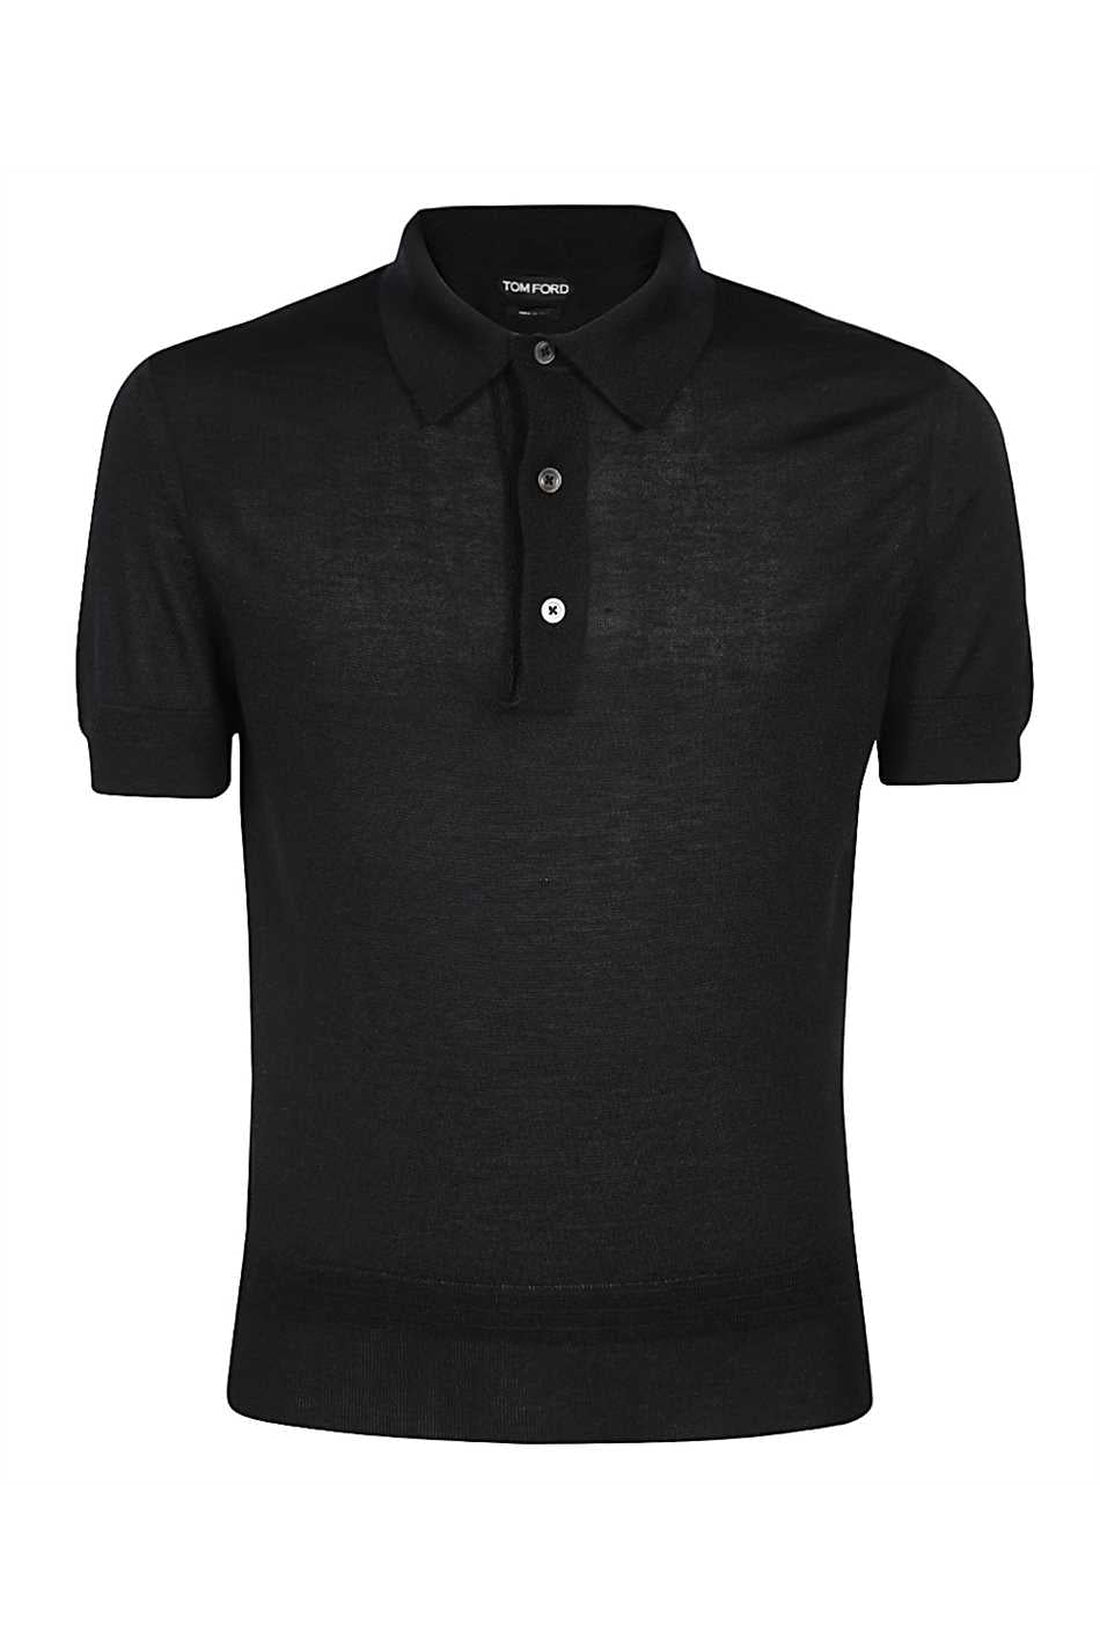 Tom Ford-OUTLET-SALE-Knitted cashmere-silk blend polo shirt-ARCHIVIST